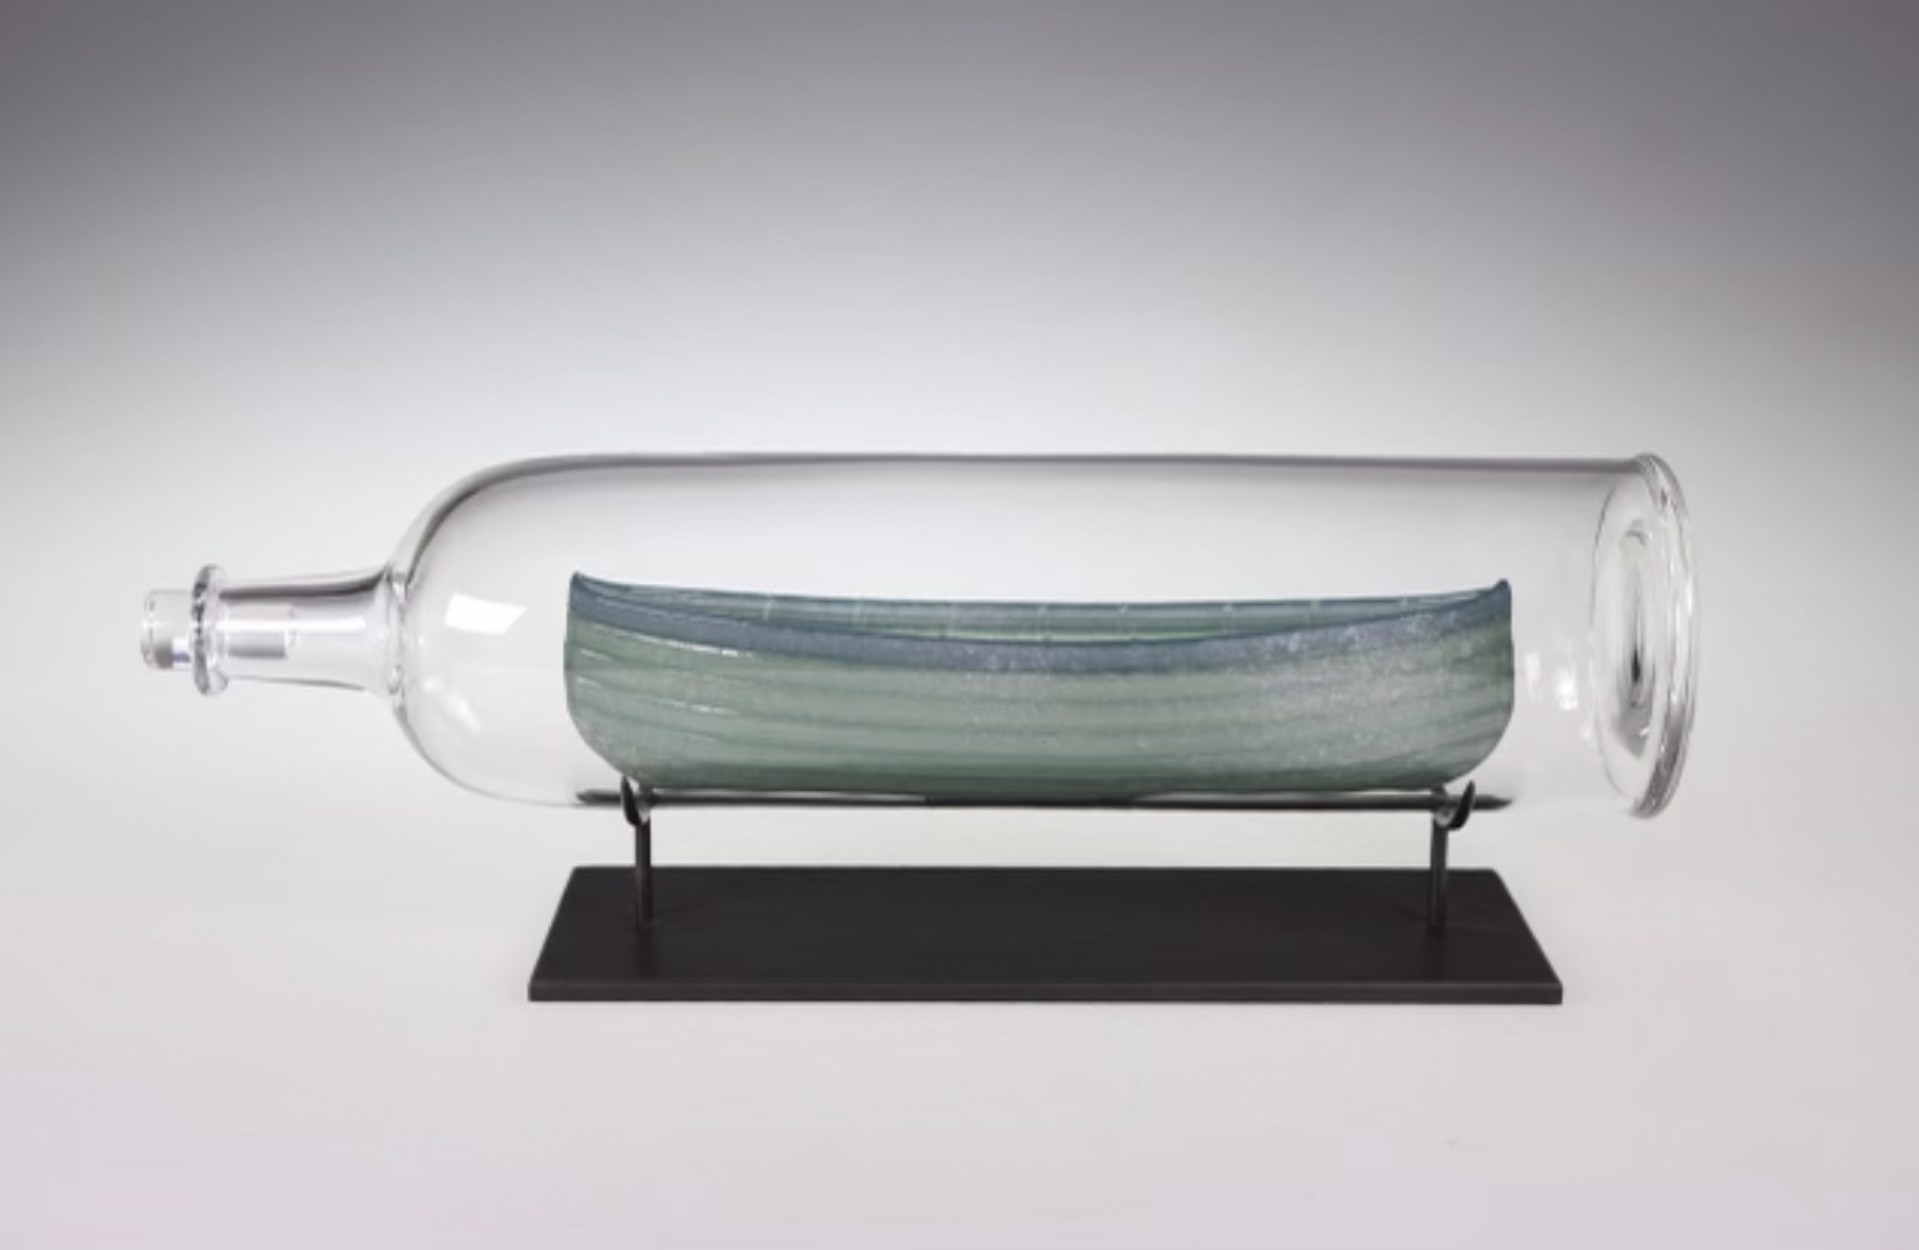 Lifeboat in a Bottle (Green with Blue Rail) by Marc Petrovic